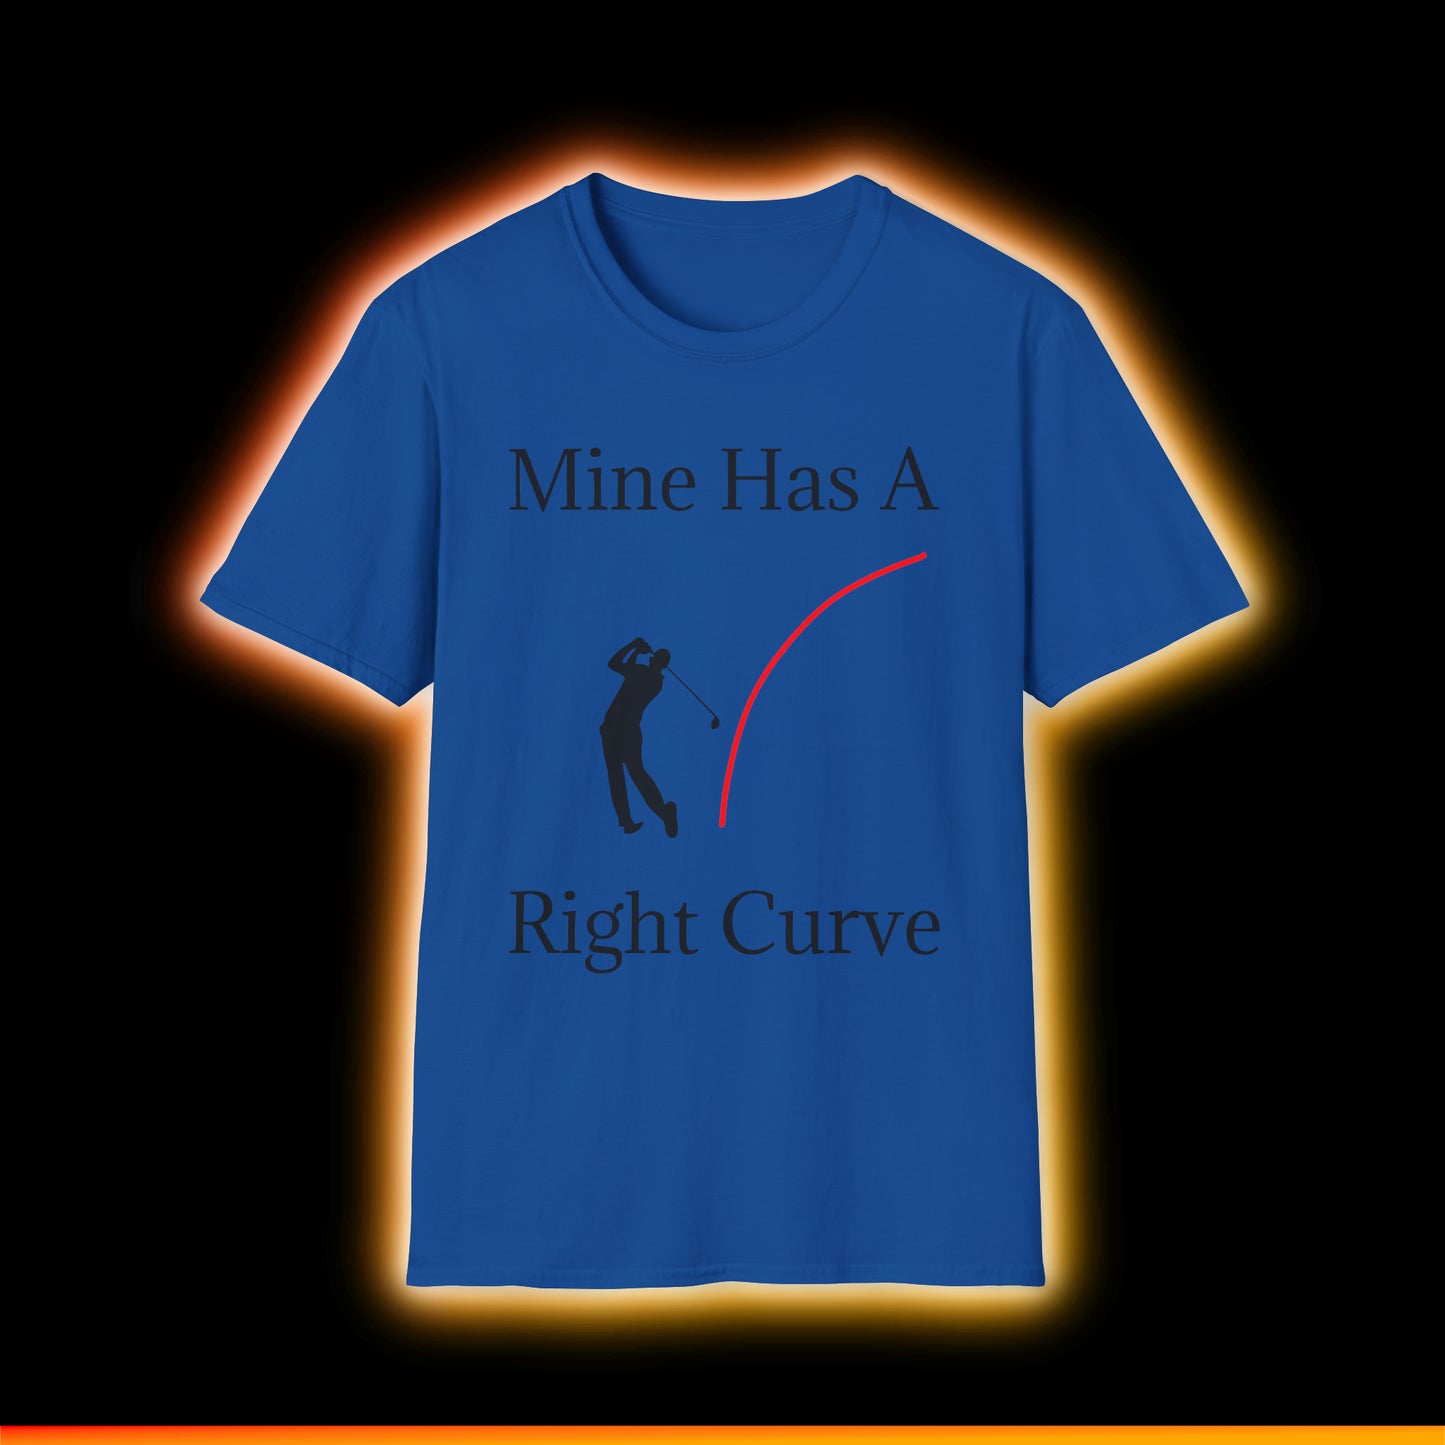 Mine Has A Right Curve